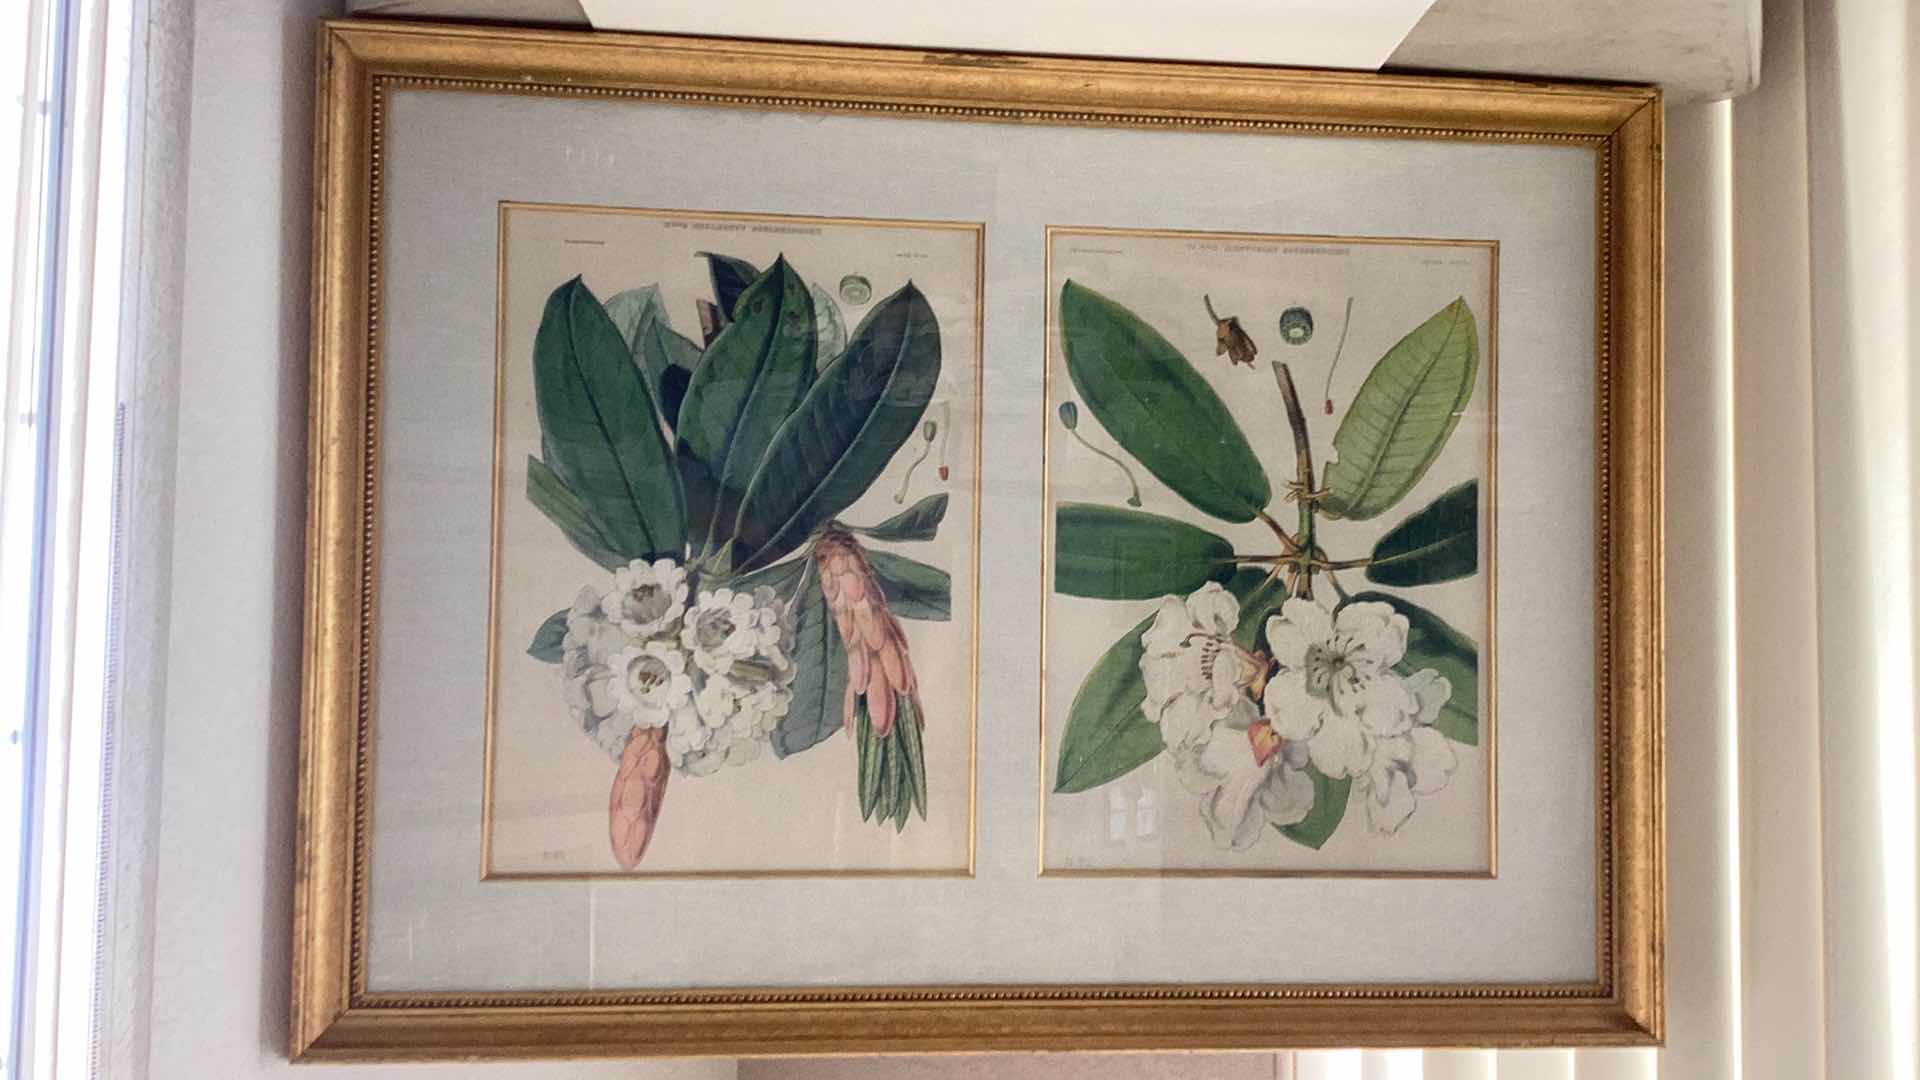 Photo 1 of ANTIQUE 1800’S JOSEPH HOOKER “RHODODENDRON AUCKLAND II, HOOK.FIL” FITCH LITHOGRAPH 51” X H 38”